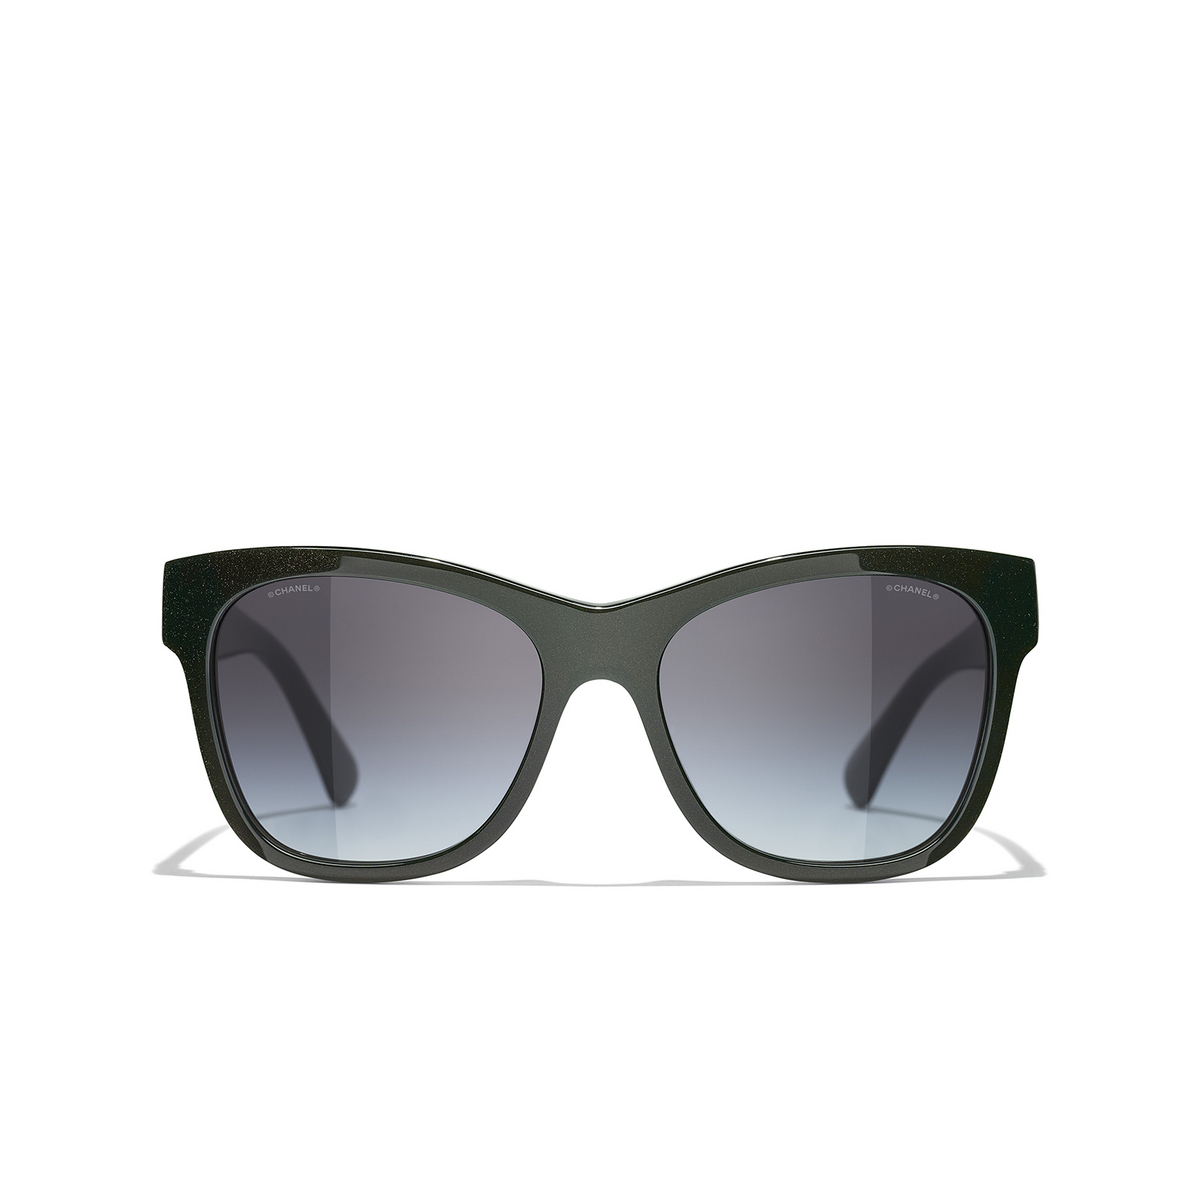 CHANEL square Sunglasses 1707S6 Green - front view